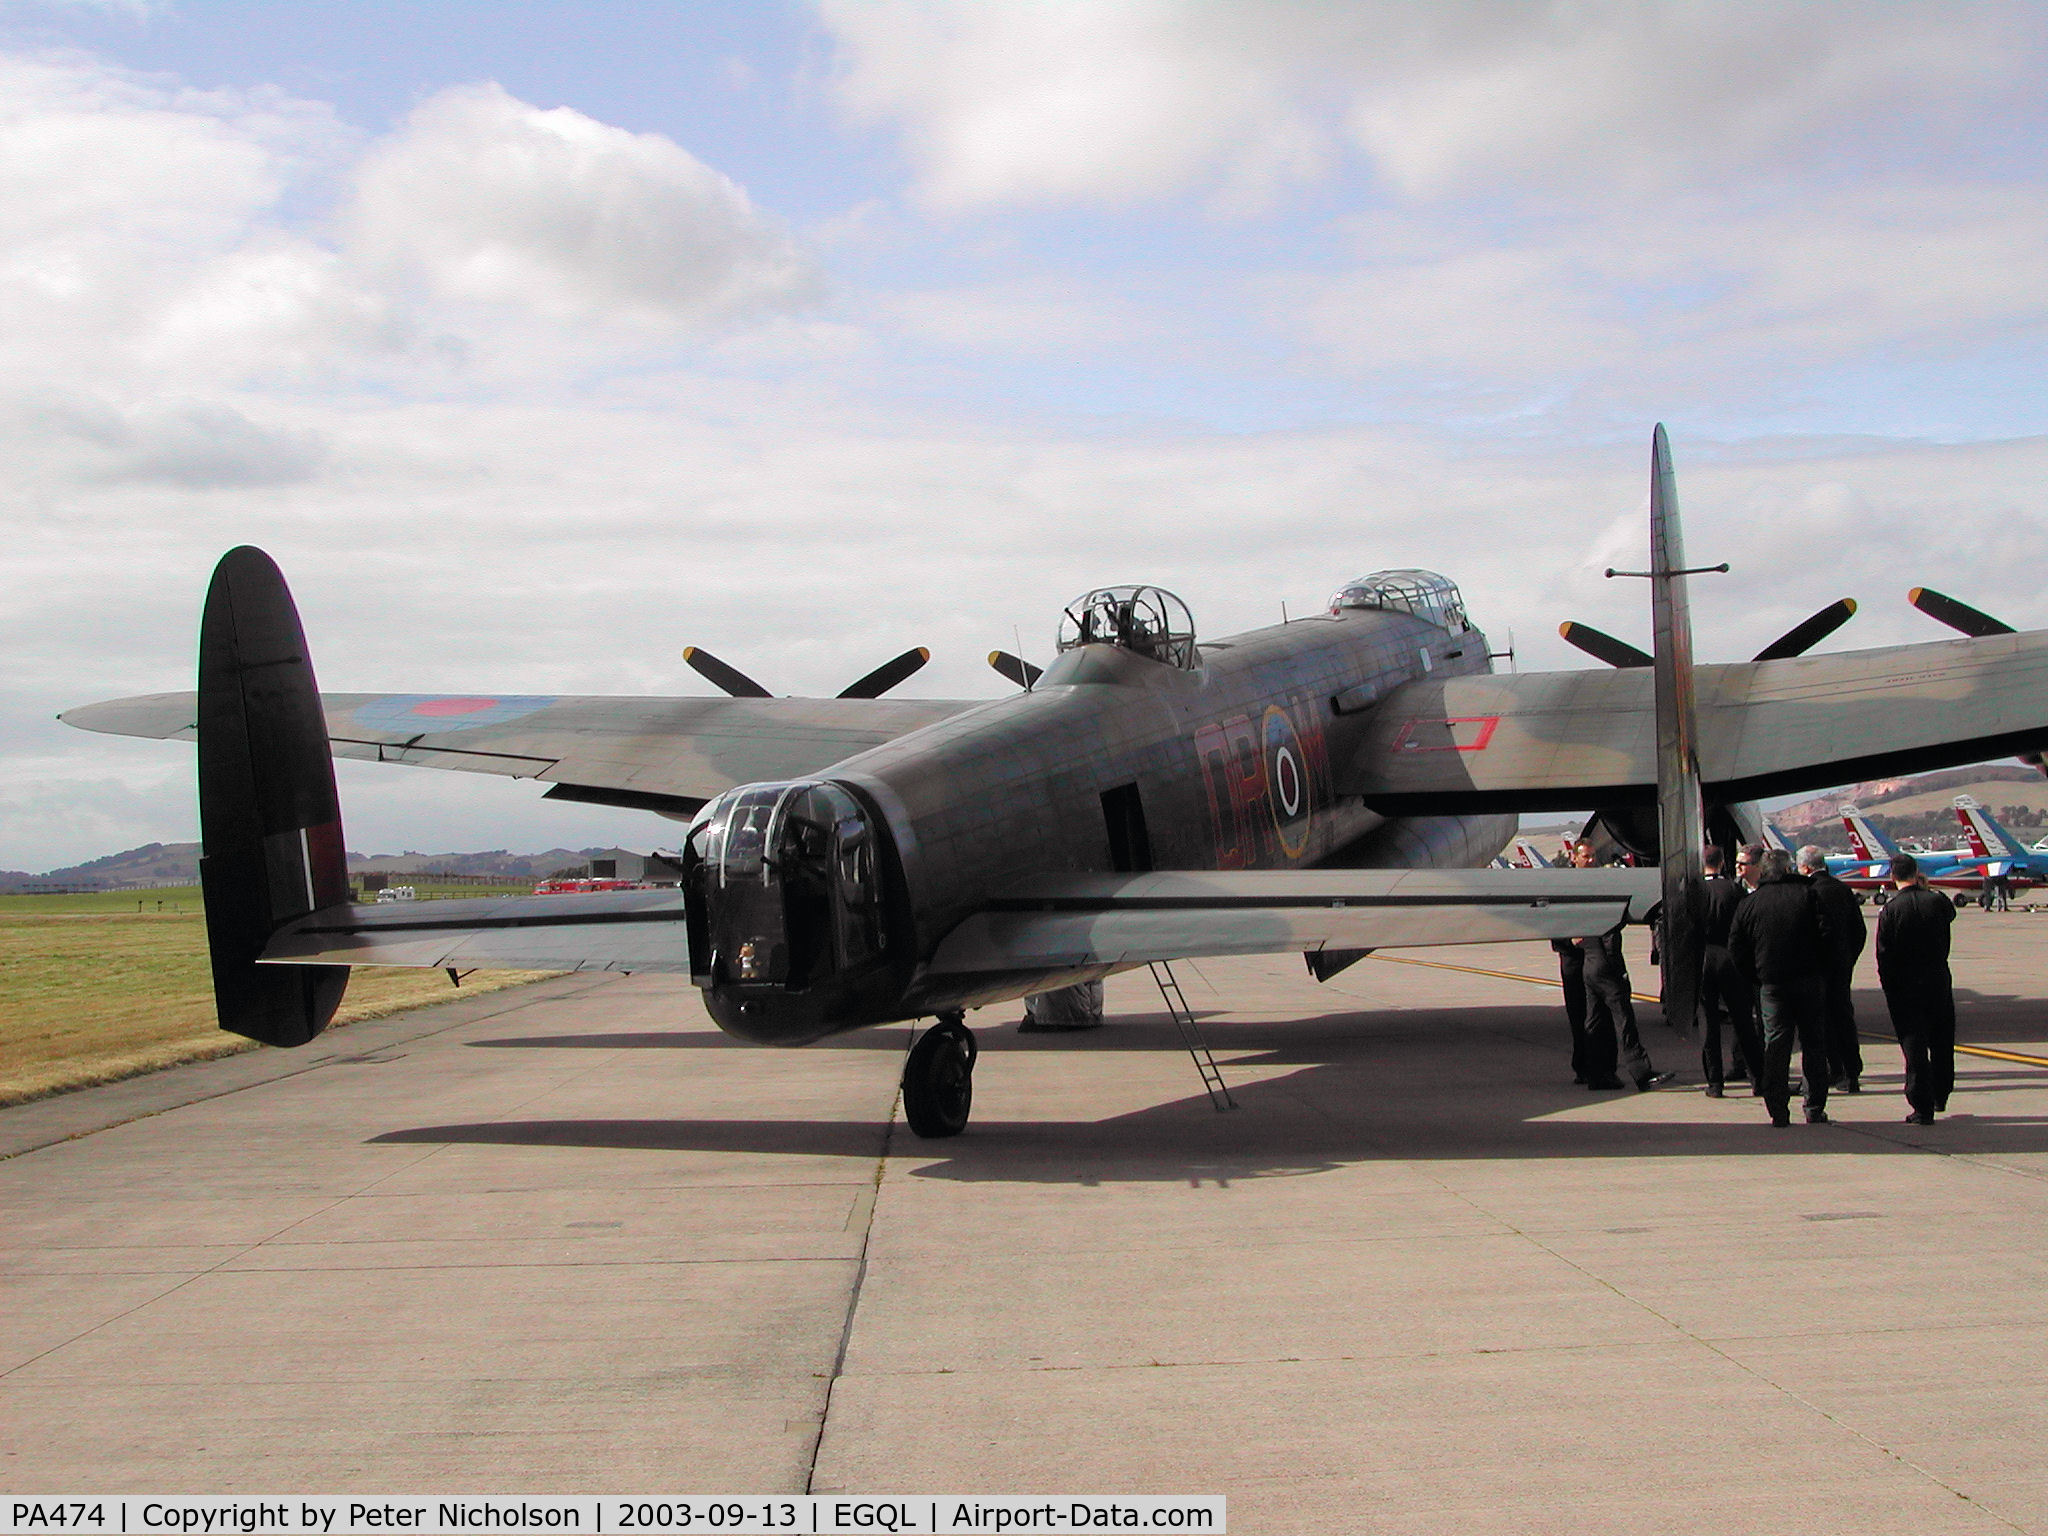 PA474, 1945 Avro 683 Lancaster B1 C/N VACH0052/D2973, Another view of the Lancaster I of the Royal Air Force's Battle of Britain Memorial Flight at RAF Coningsby on display at the 2003 RAF Leuchars Airshow.